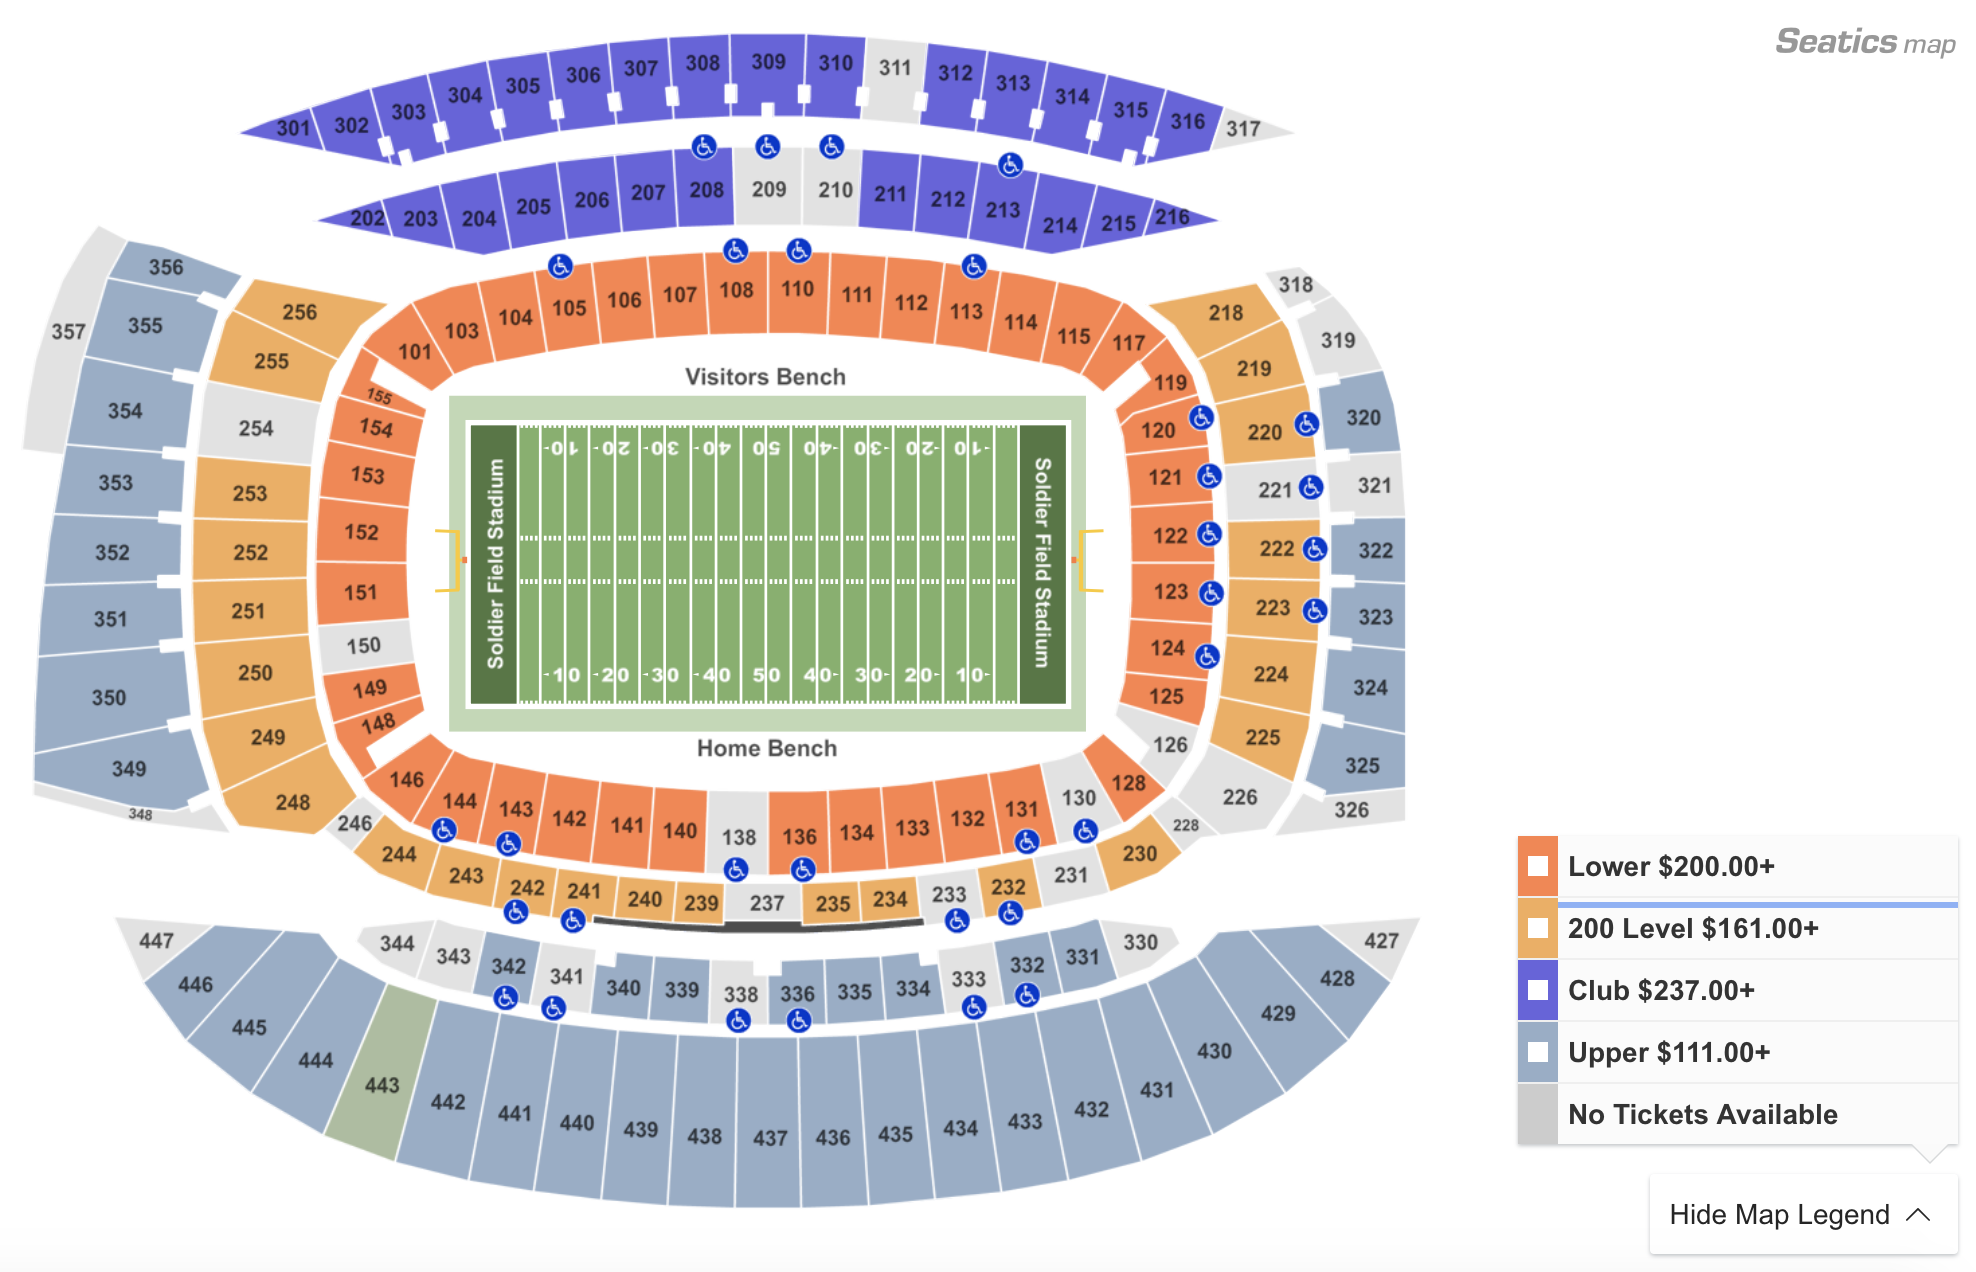 Chicago Bears Seating Chart With Seat Numbers